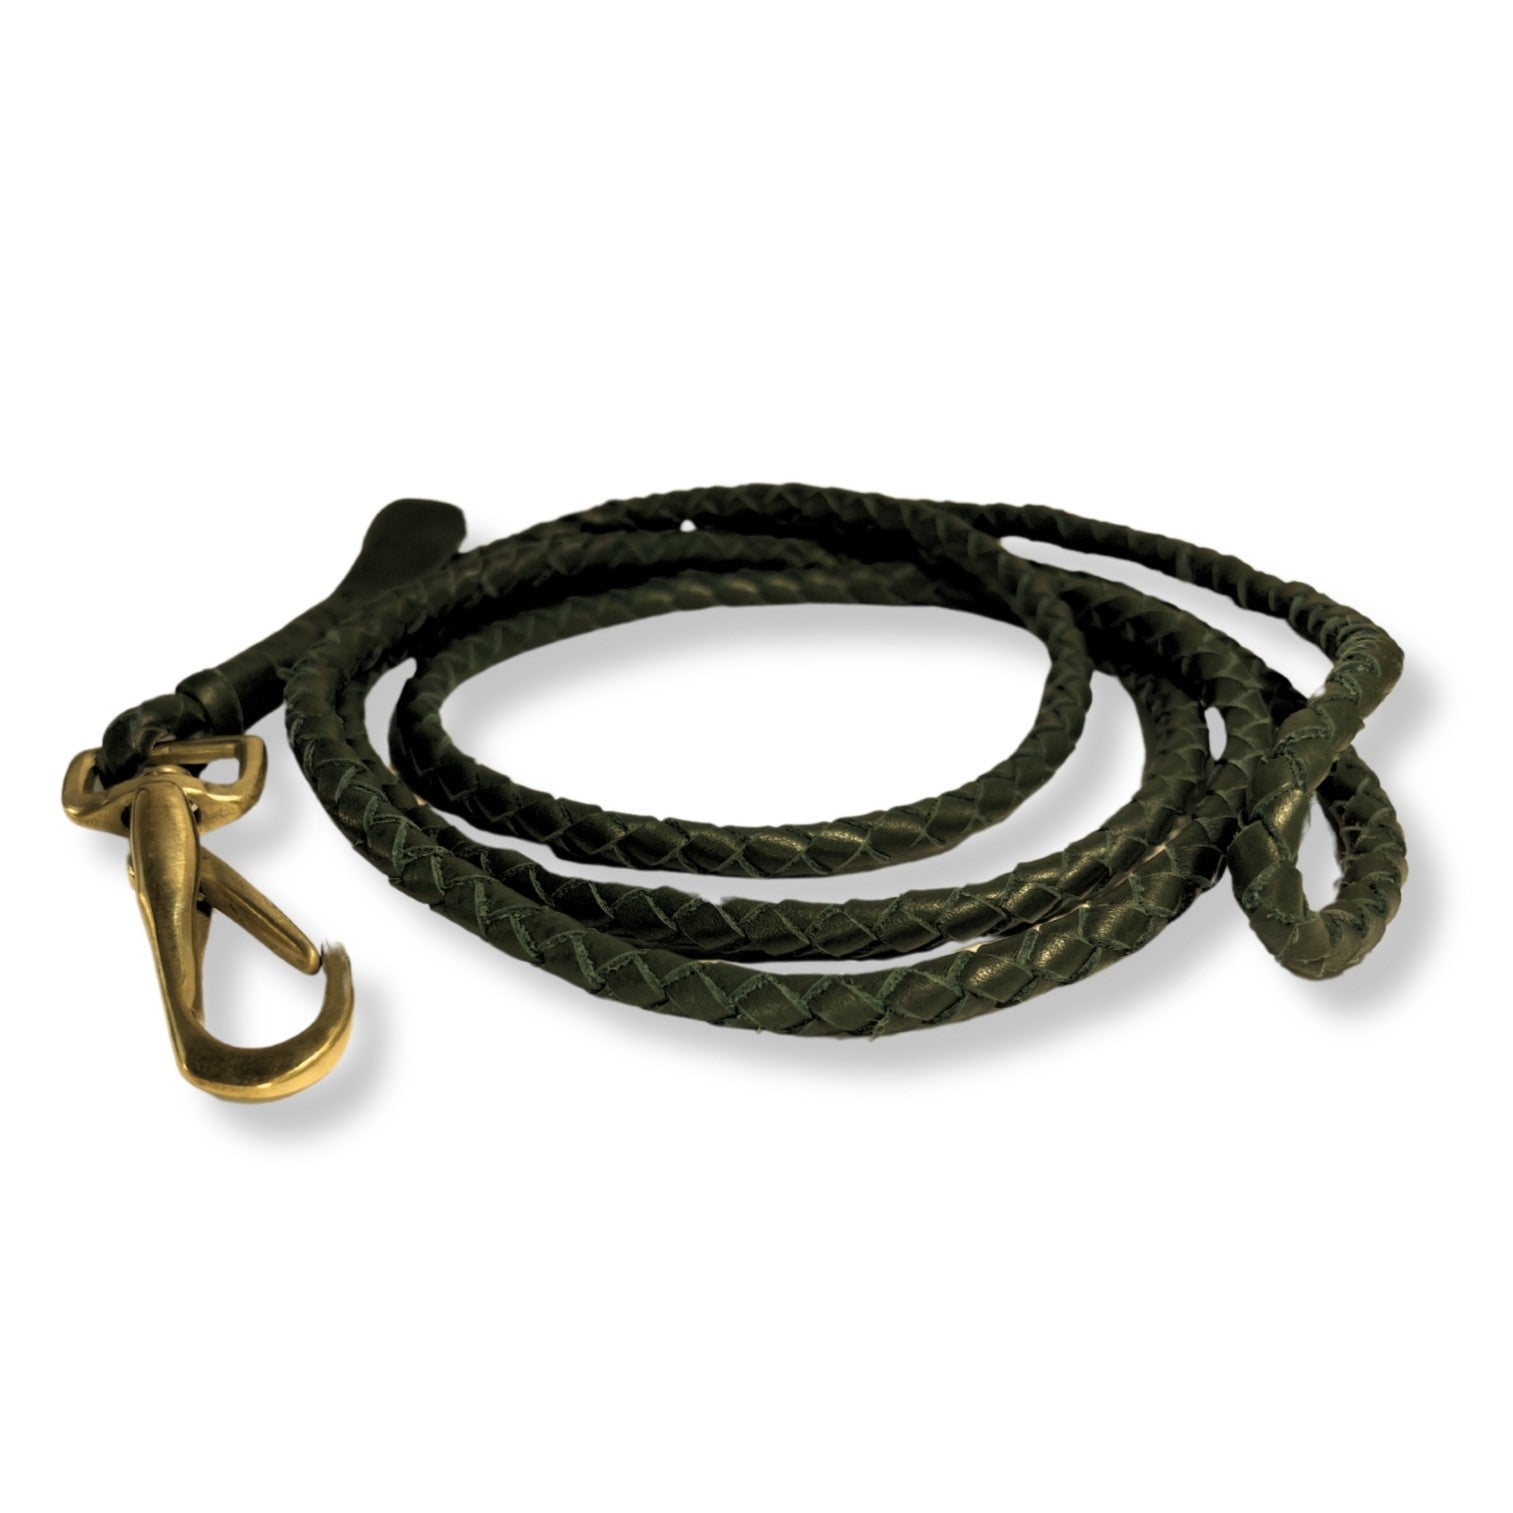 A coiled, green buffalo leather braid dog leash with a brass carabiner clasp, isolated on a white background, highlighting its elegant design and craftsmanship suitable for pet owners who prefer stylish accessories - Lulu Lead in chive by Georgie Paws